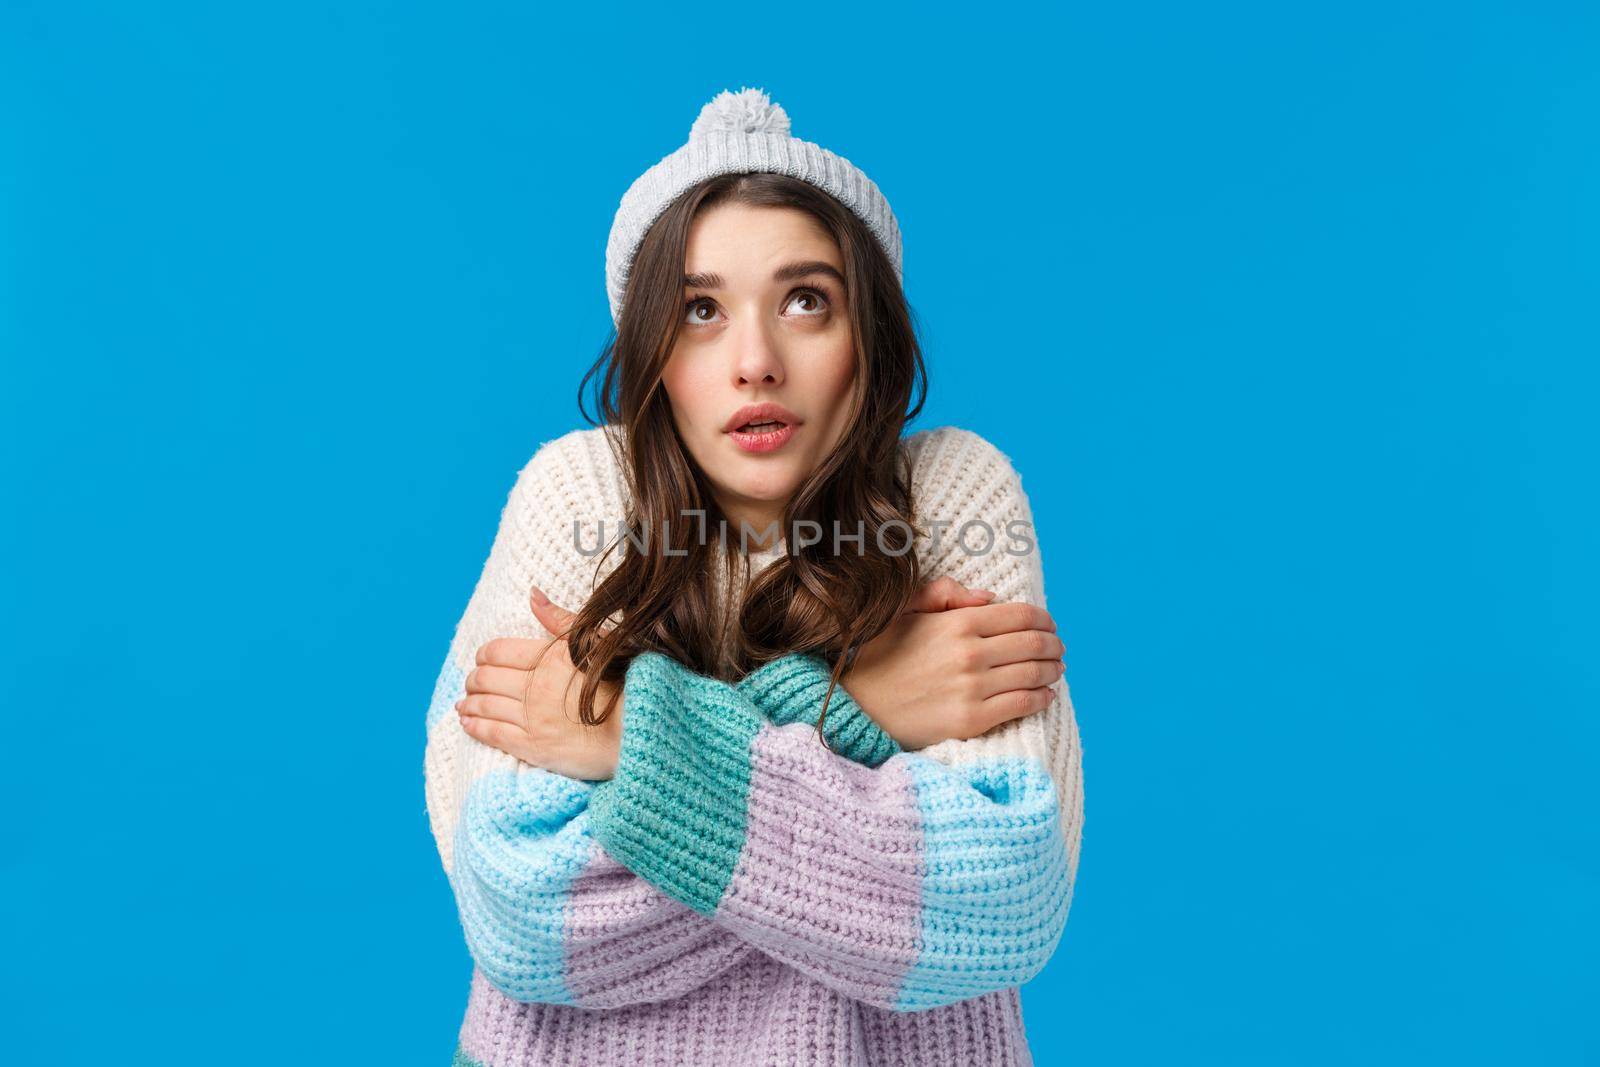 Girl watching at snowflakes, looking up and trembling from cold standing in winter hat, sweater, hugging herself to warm-up, embracing body clench teeth freezing temprature, blue background.